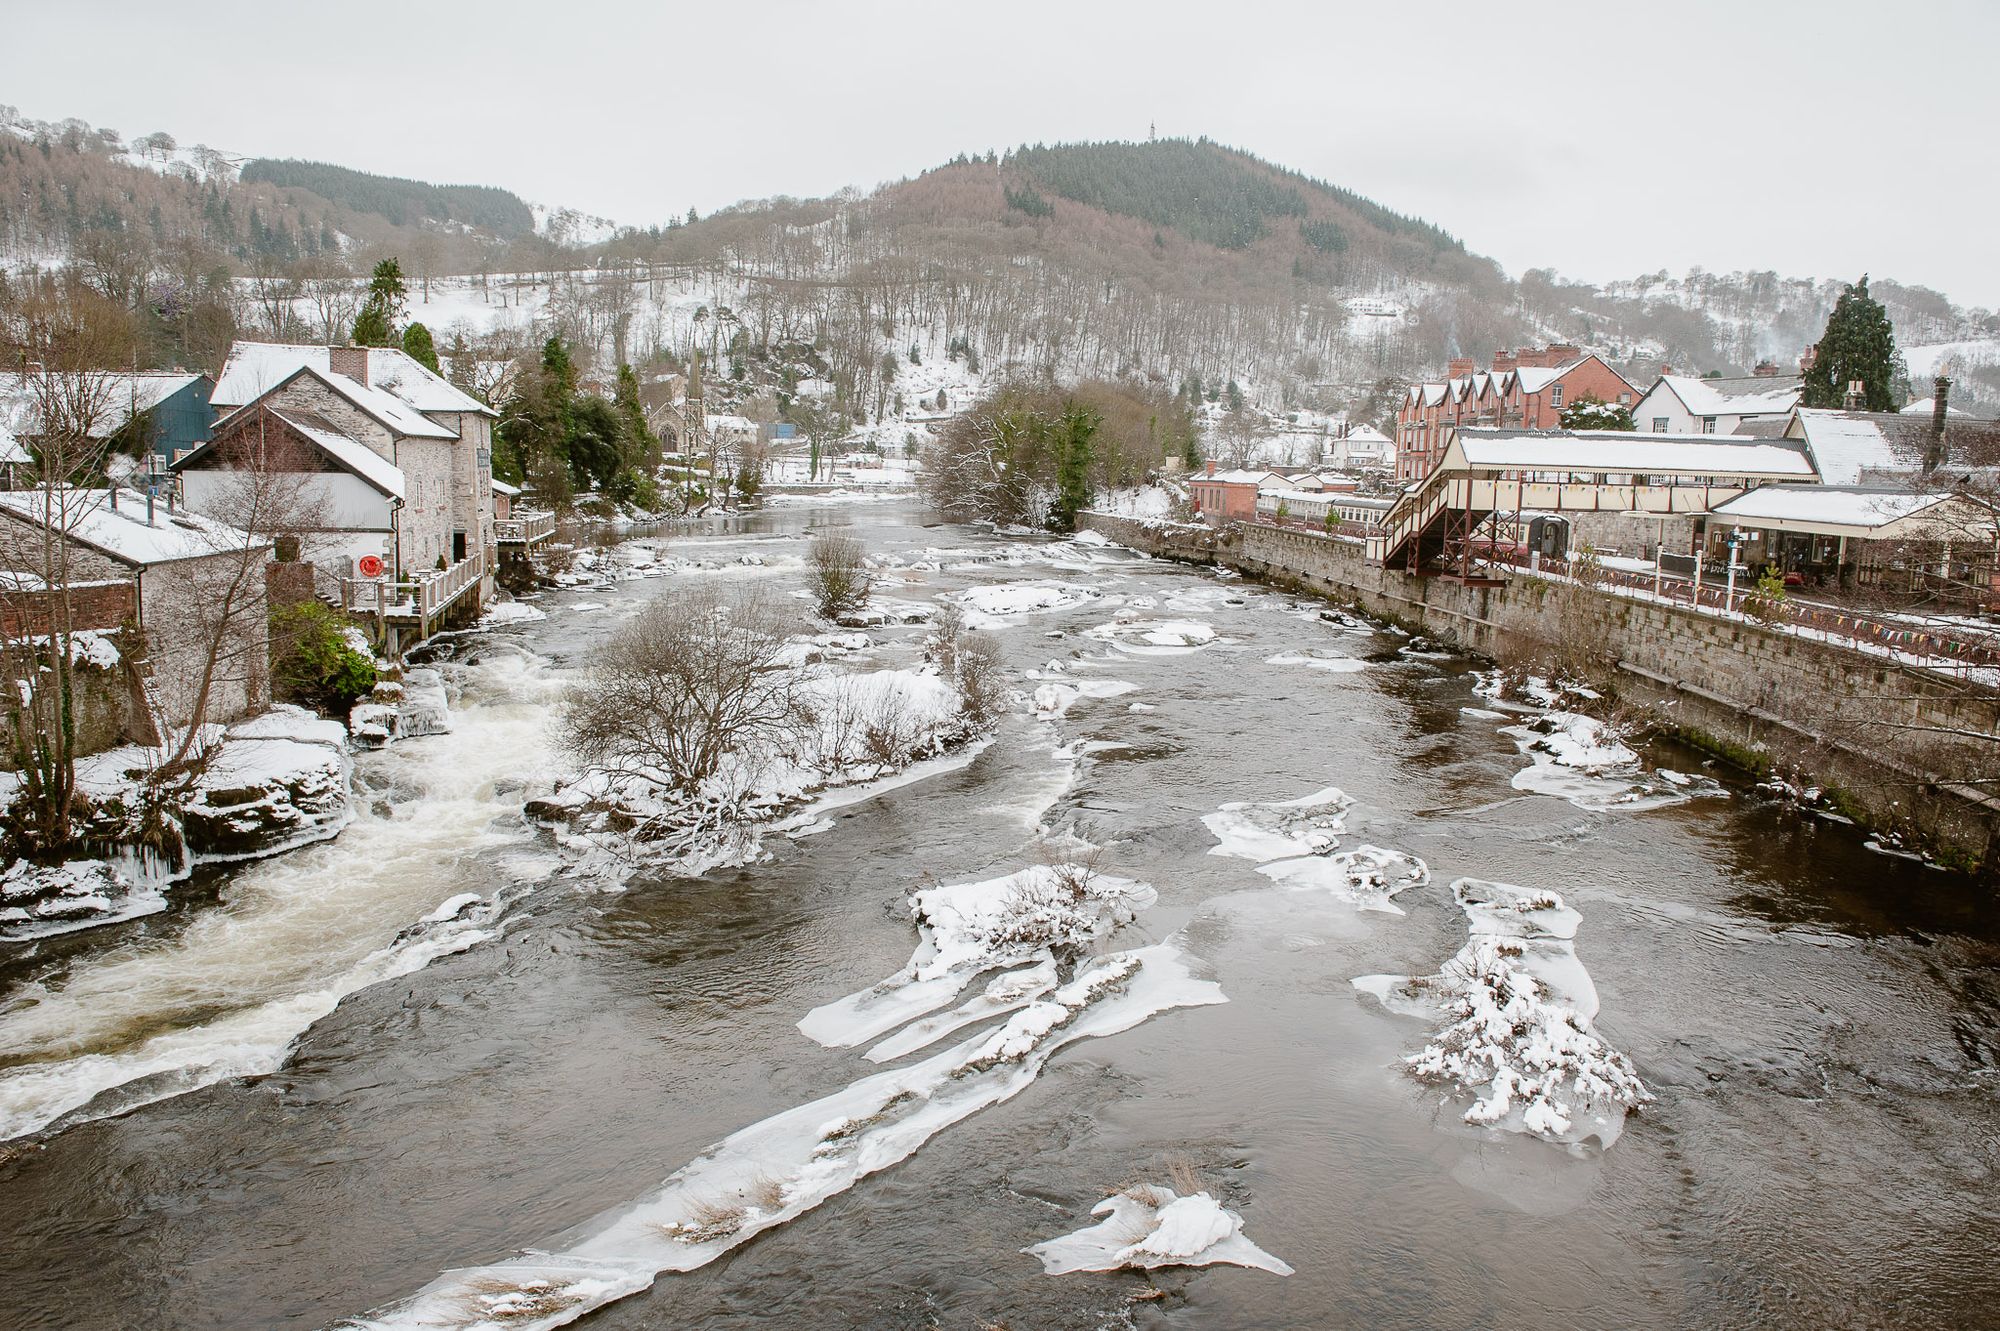 A river runs through the town of Llangollen. On the right is the train station. On the left are houses. Snow is on the rocks in the river and the banks.